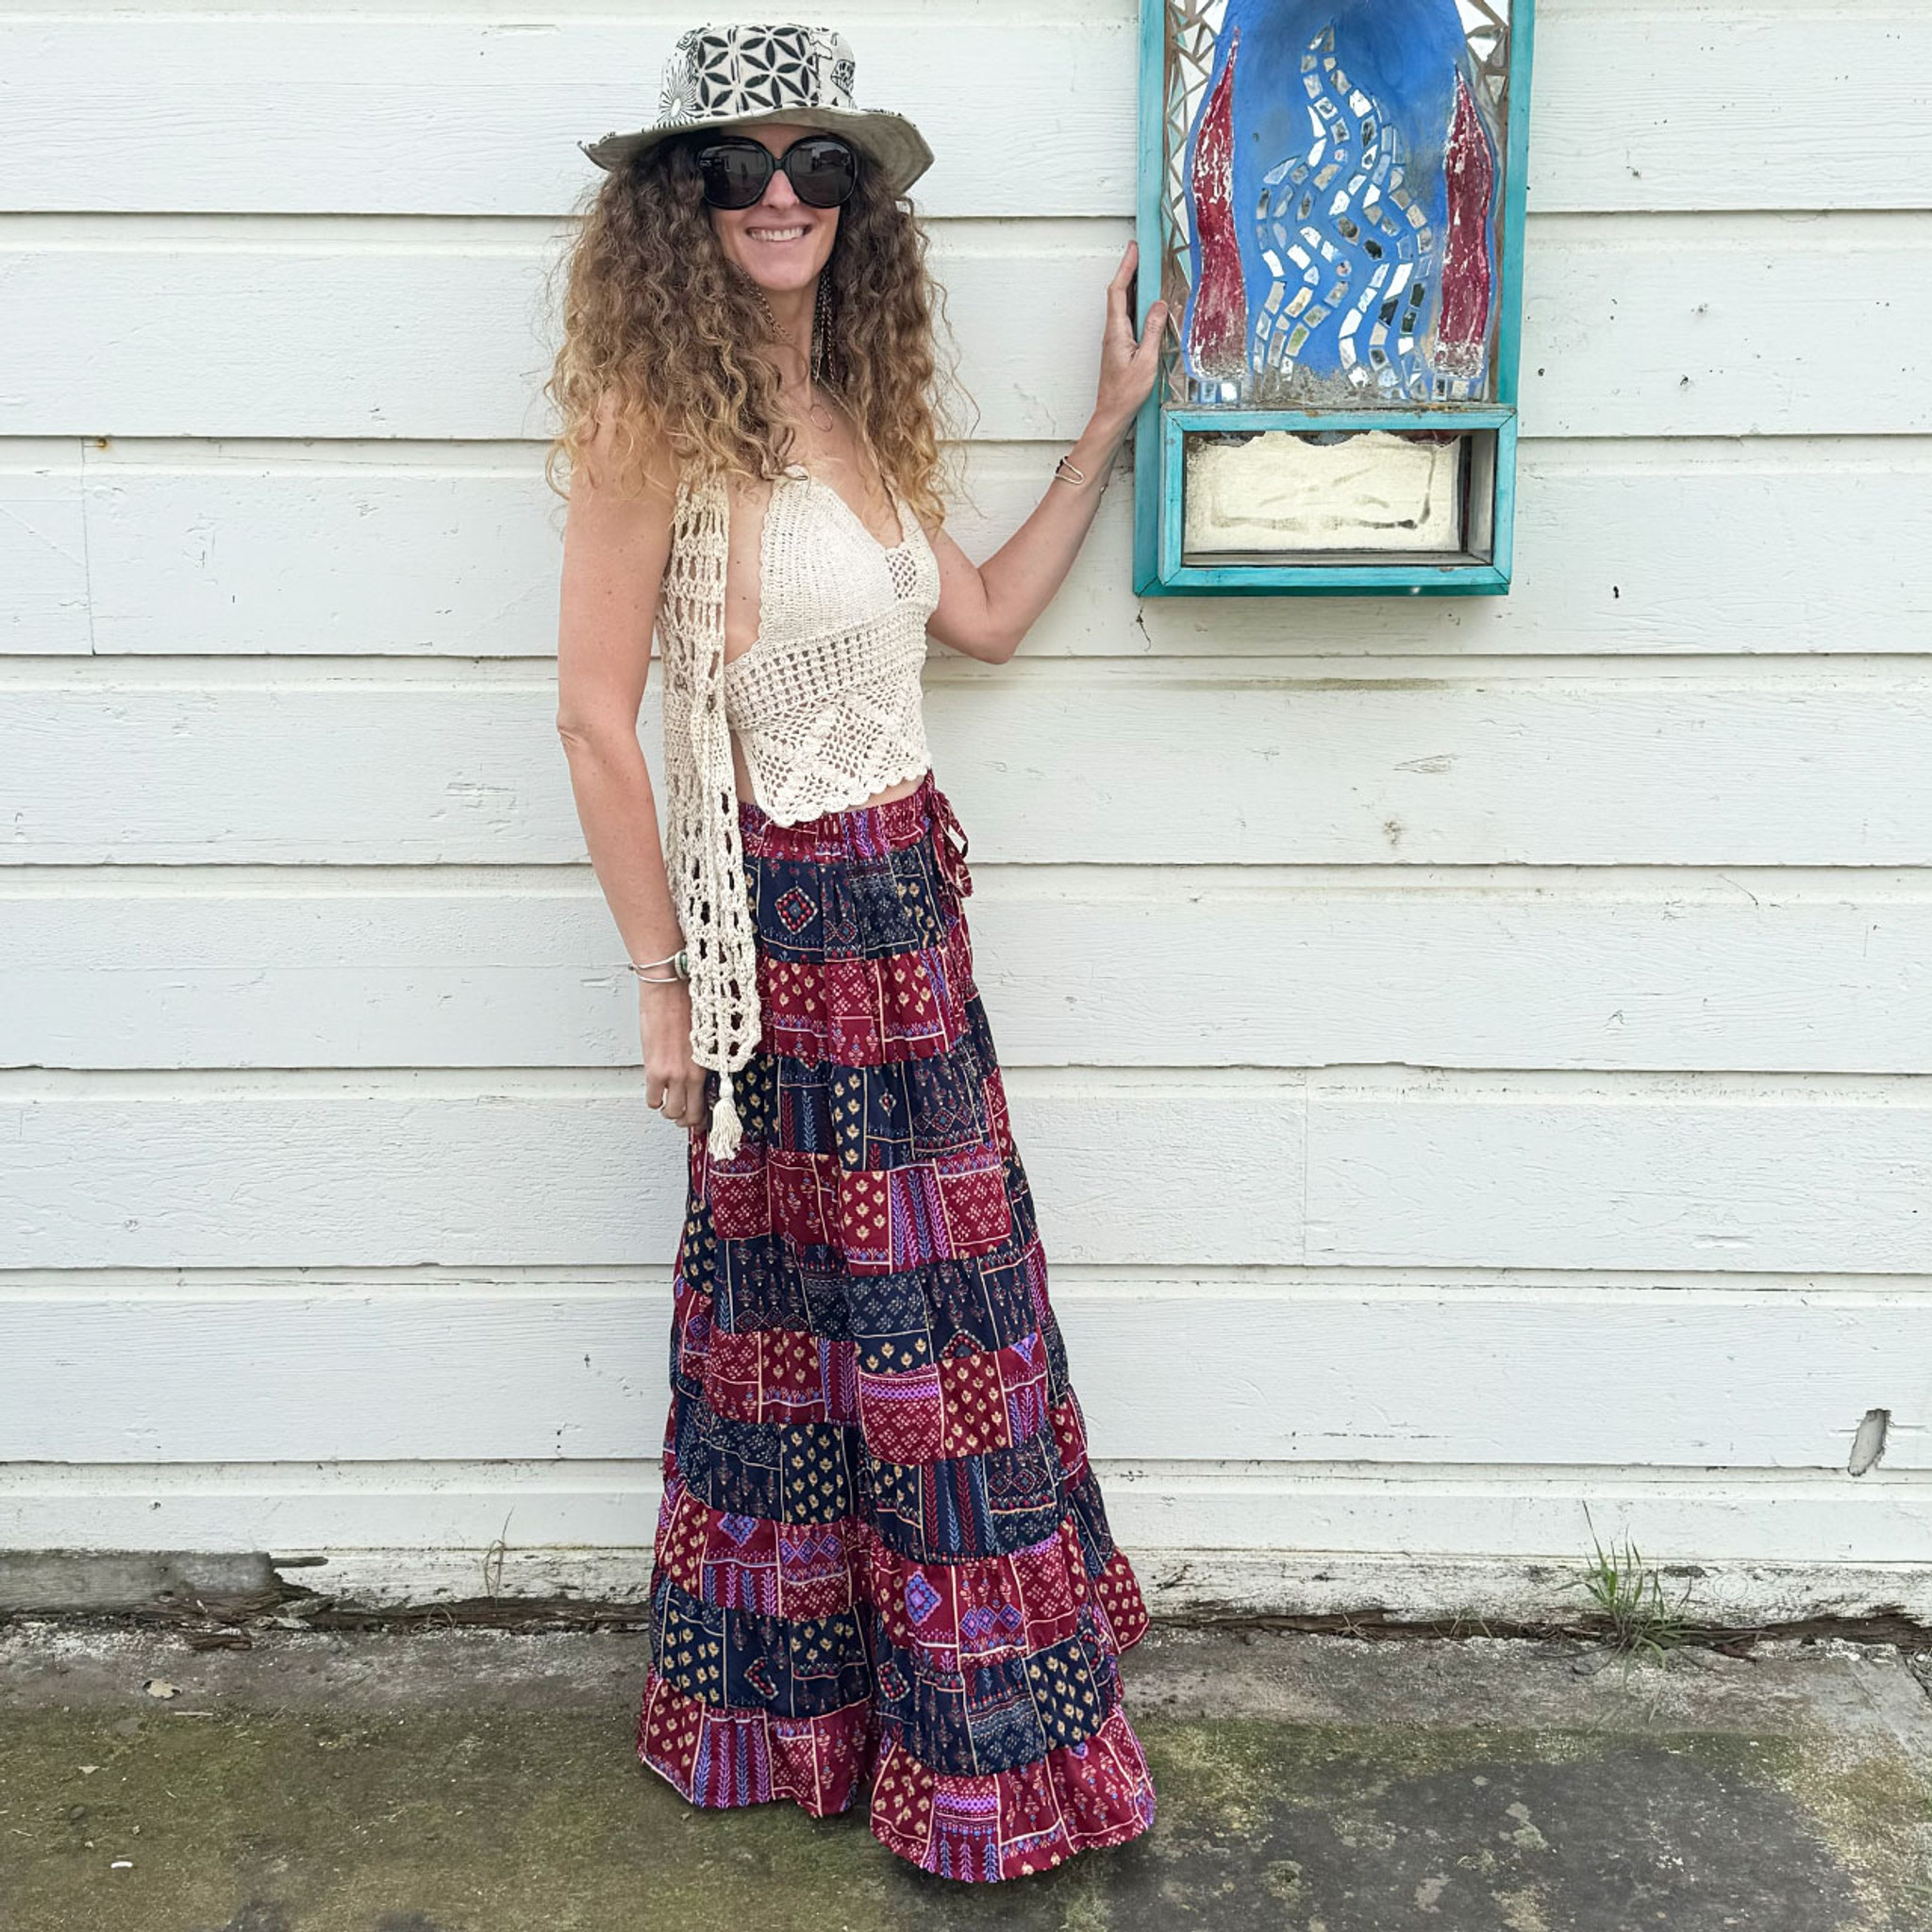 TEA FOR TWO MAXI SKIRT - Rayon Crepe Faux Patchwork Print Elastic Waist Tiered Maxi Skirt Combo Patch Marn/Blu